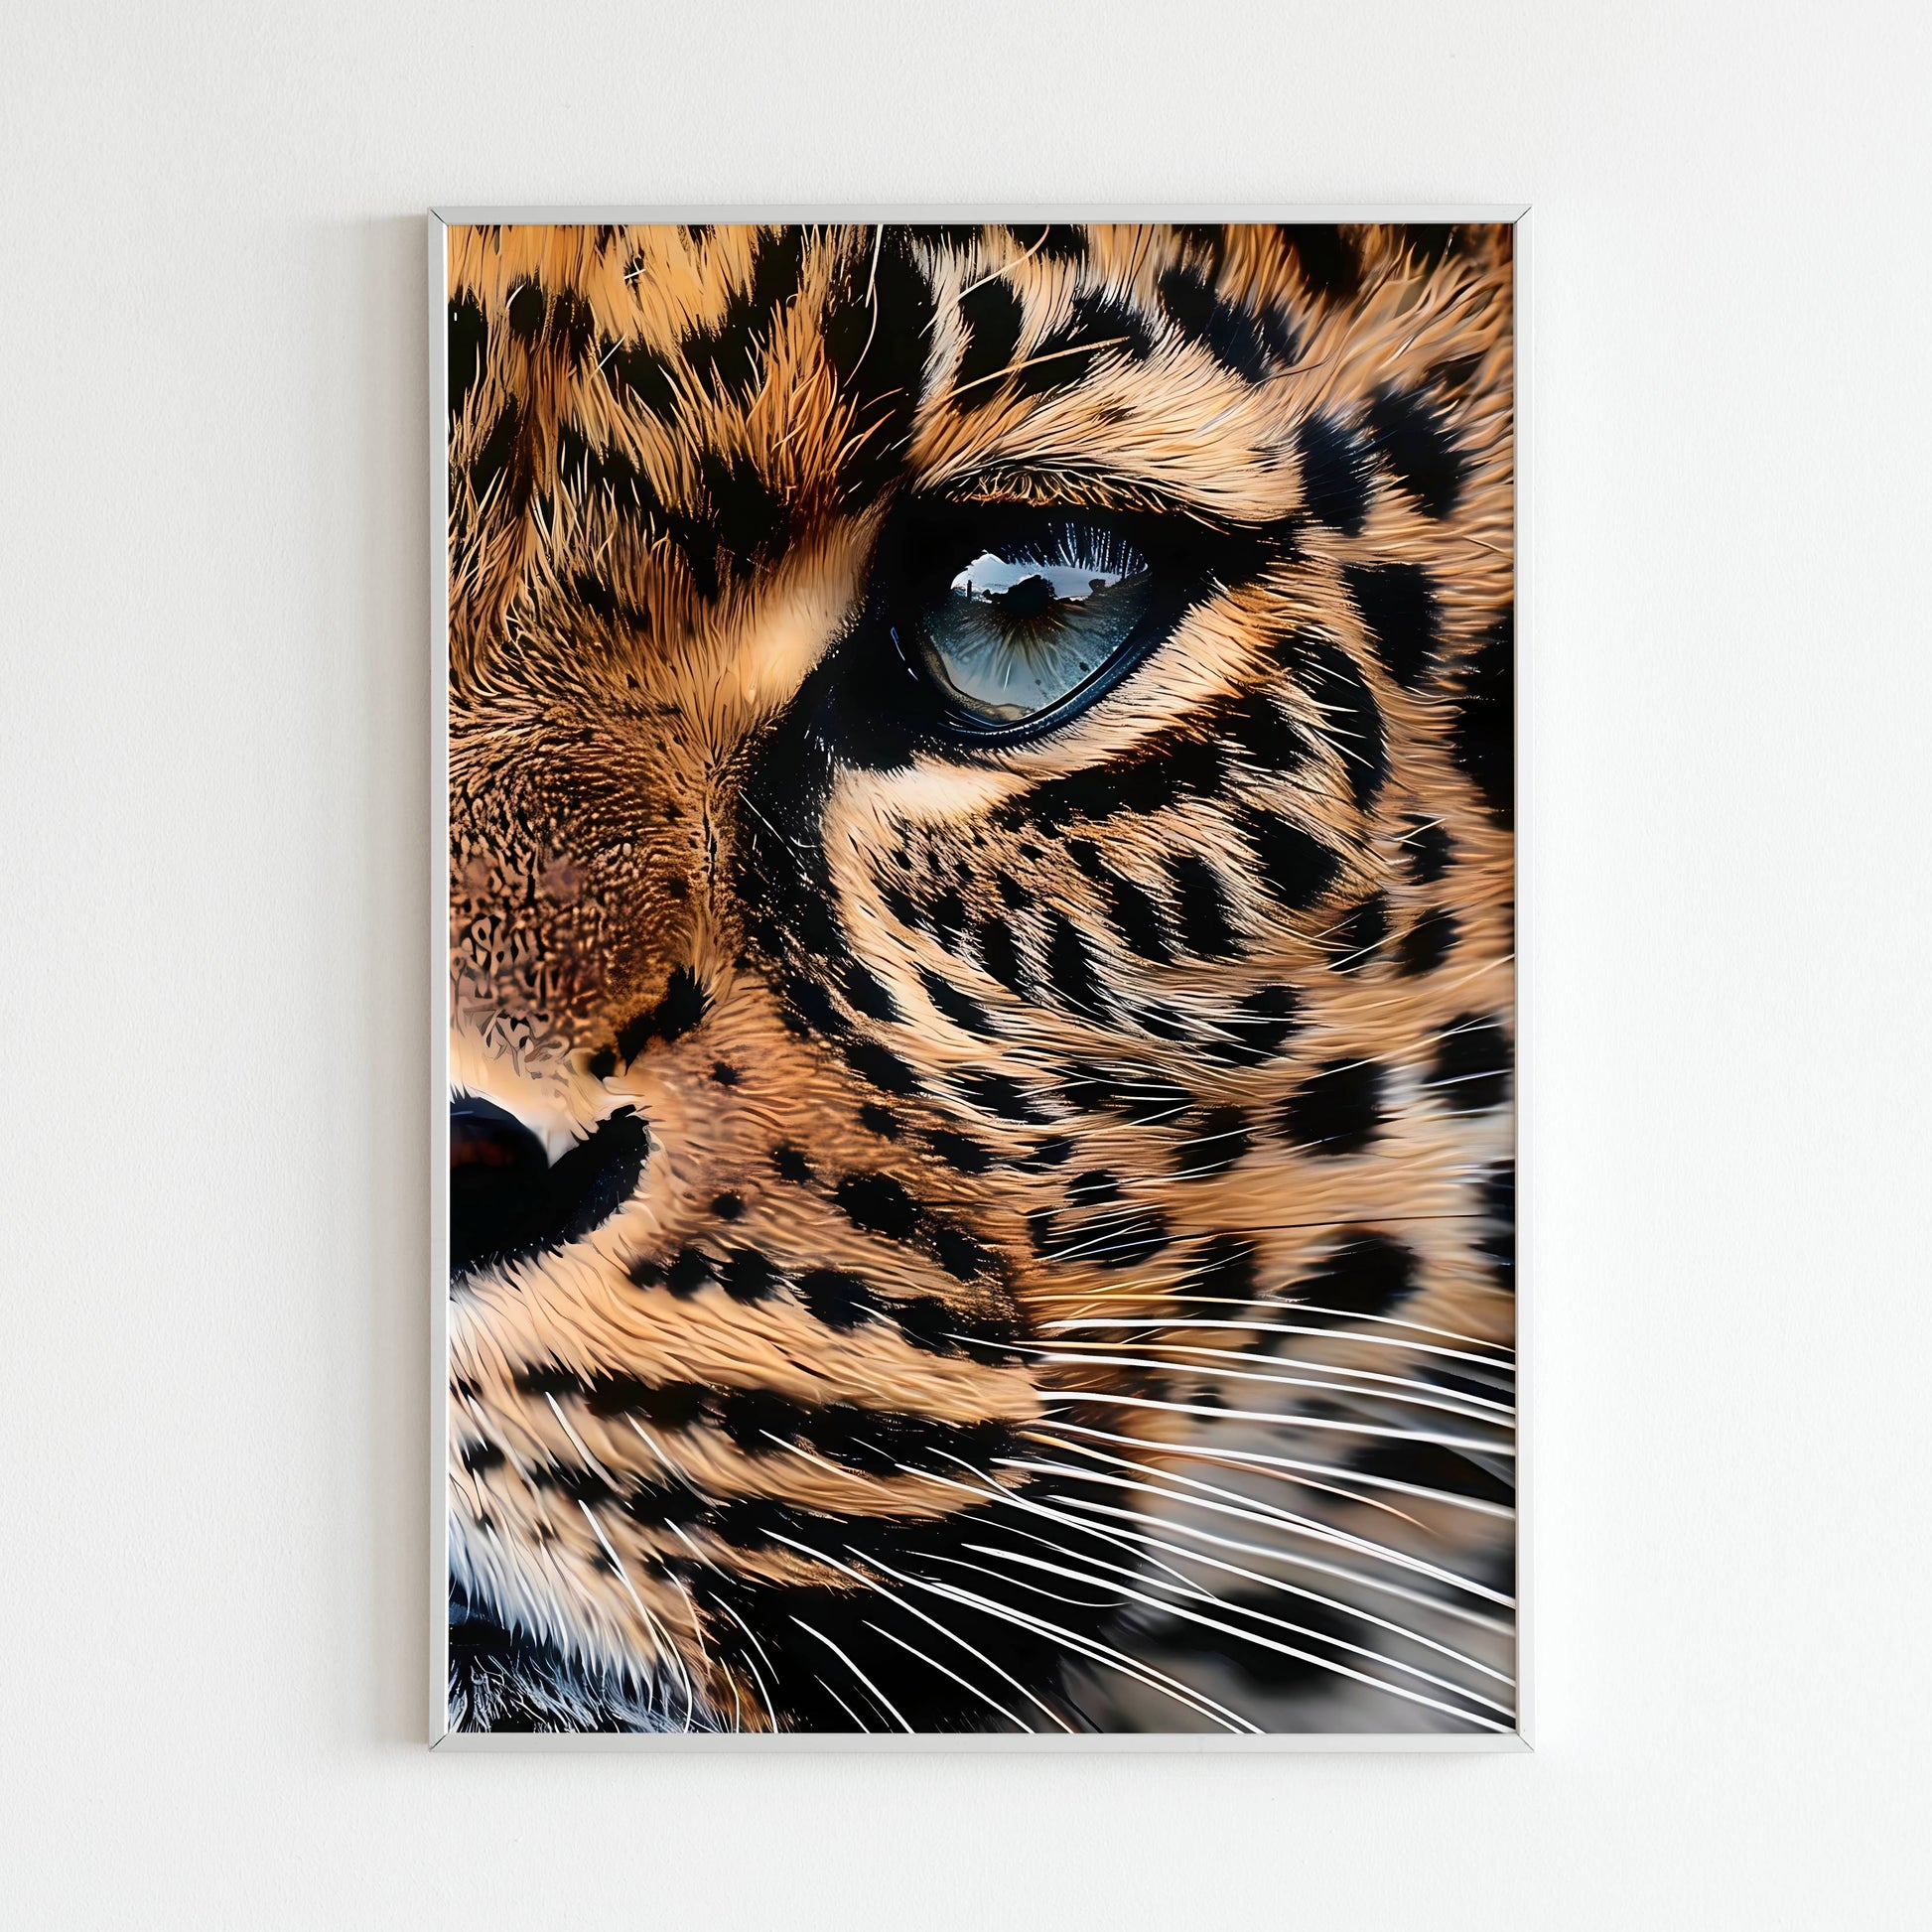 Encounter the captivating gaze of a leopard with this printable poster (physical or digital).